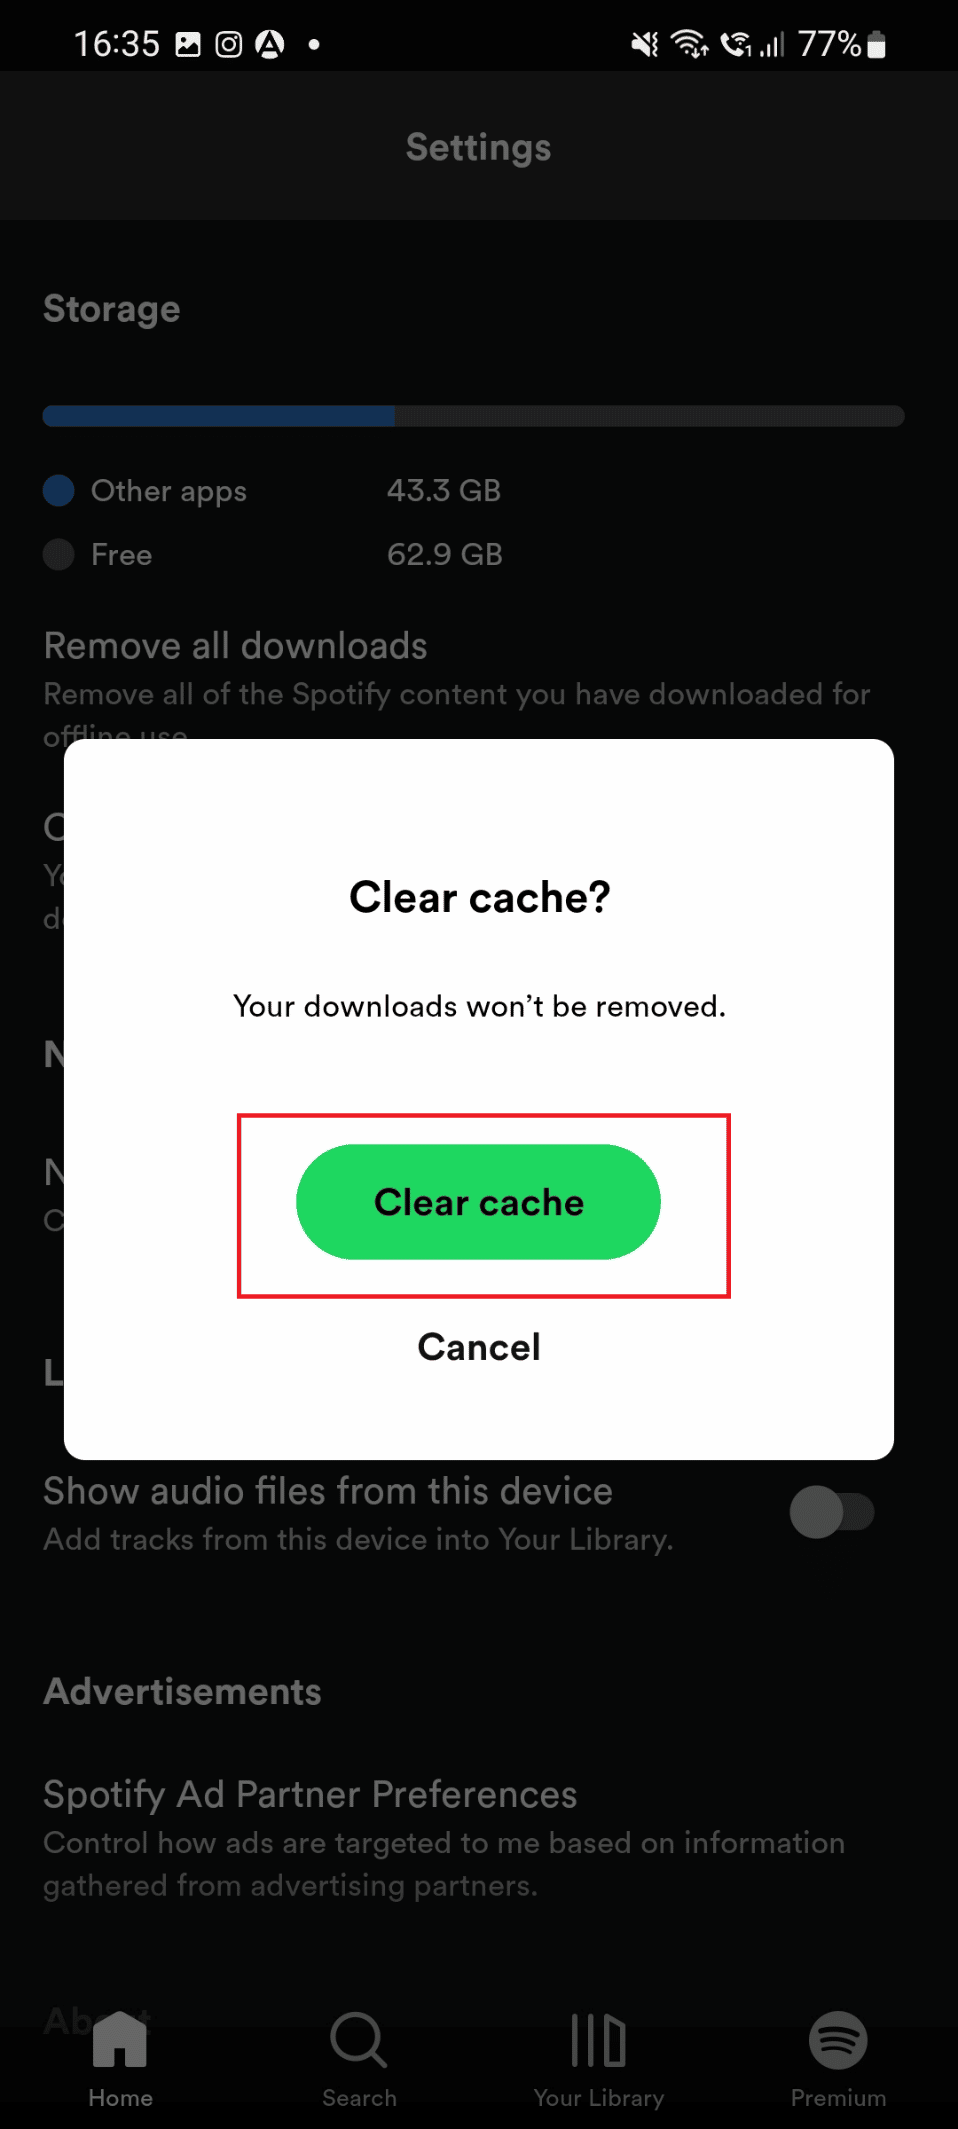 CLEAR CACHE OPTION ON ANDROID FOR SPOTIFY APP